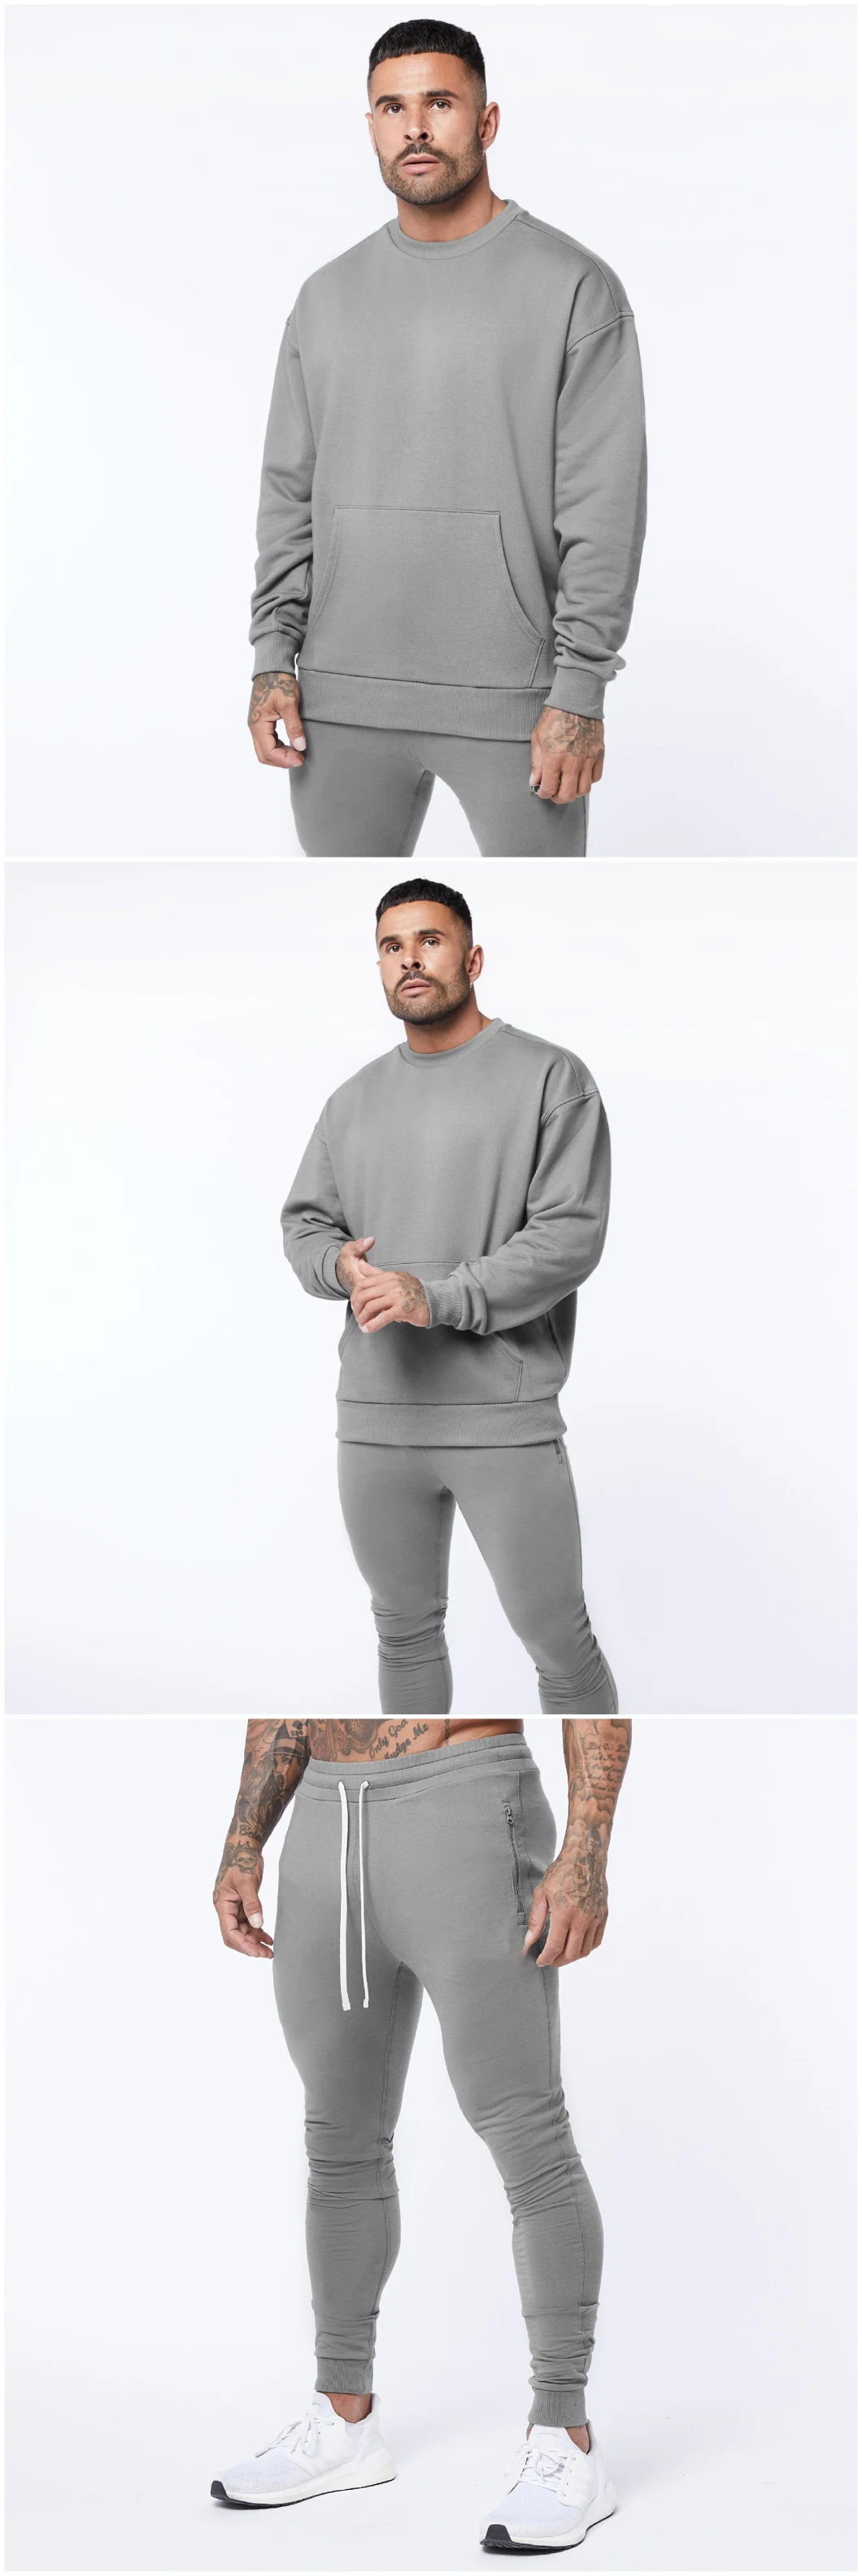 Jogging Suit Wholesale Custom Fitness Wear Sweat Suits Sportswear Activewear Tracksuits Hoodies and Jogger Set